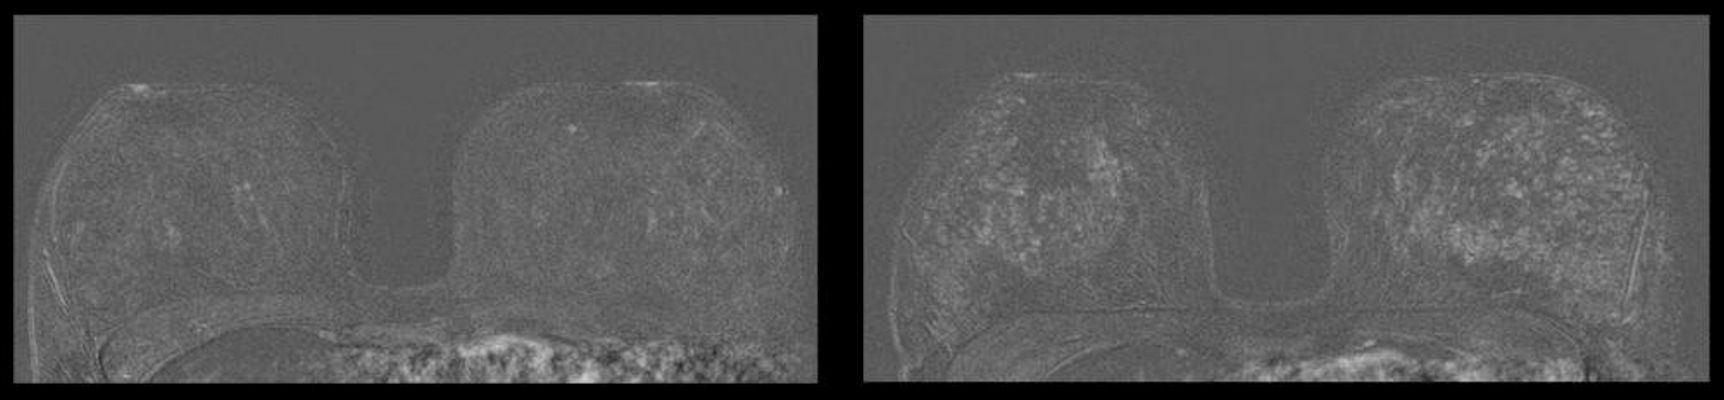 Breast MRI of a 41-year-old patient without IUD in place and 27 months later